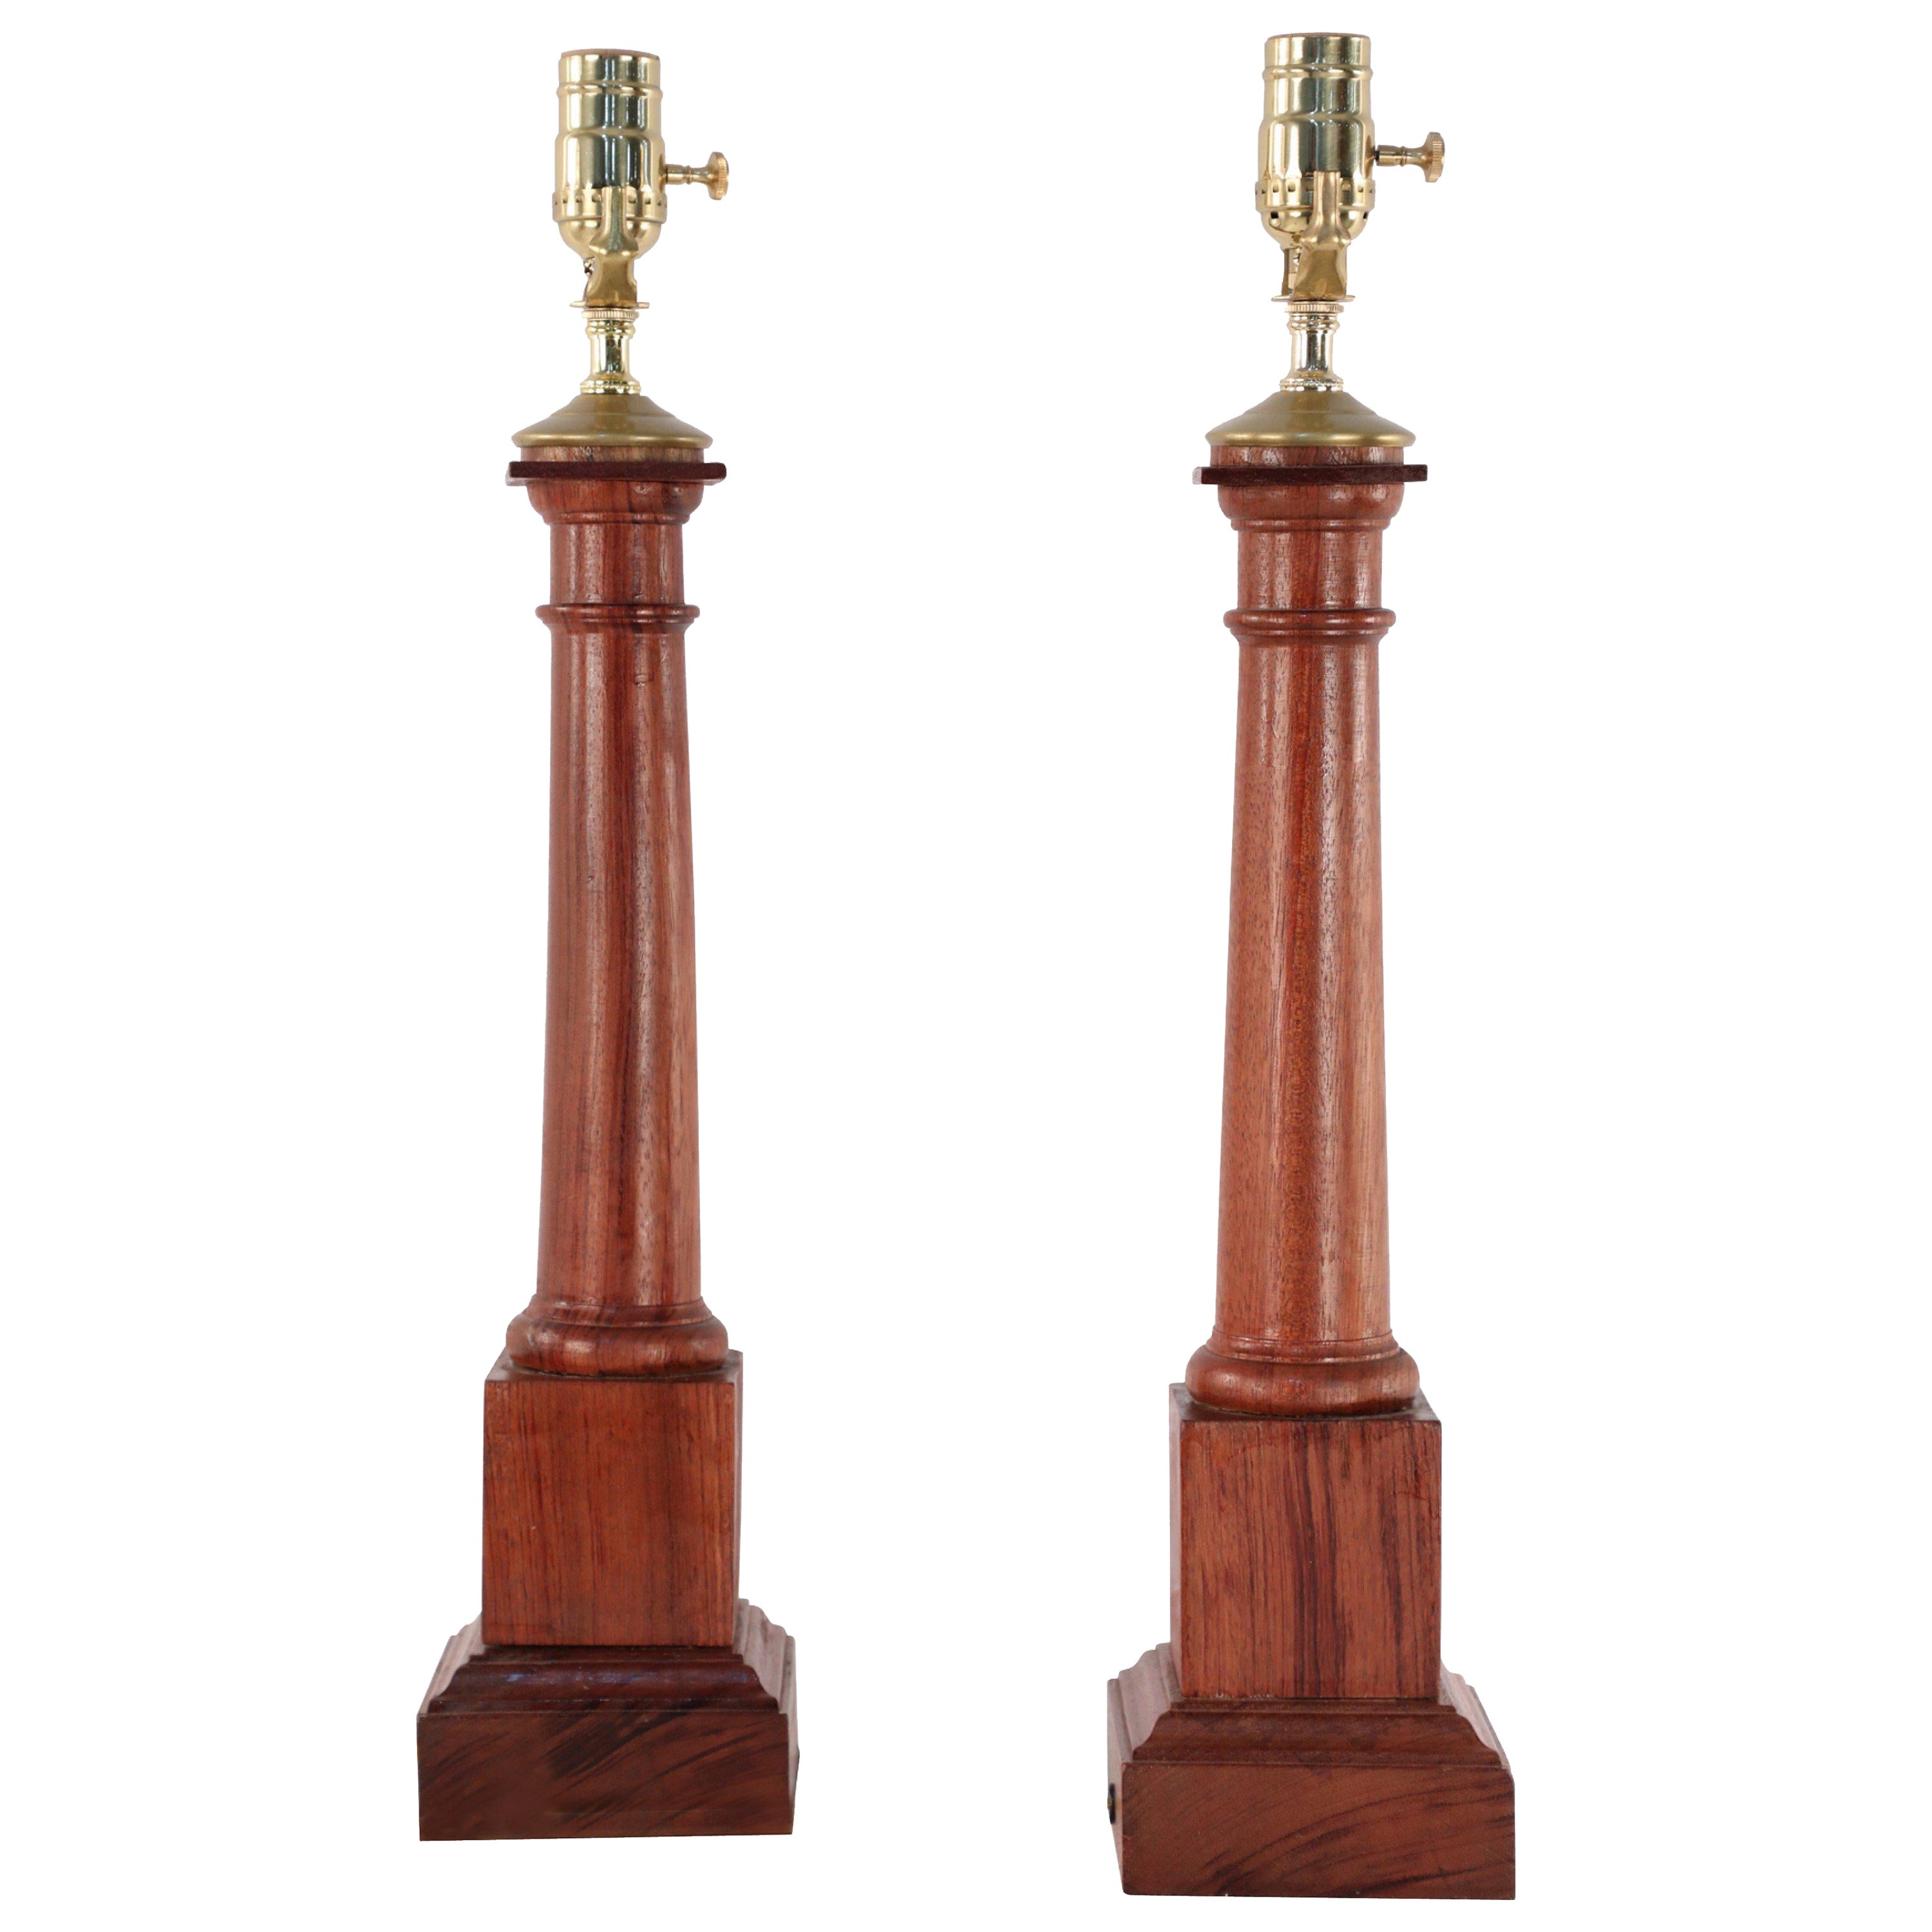 Pair of Italian Neo-Classic Style Wooden Column Table Lamps